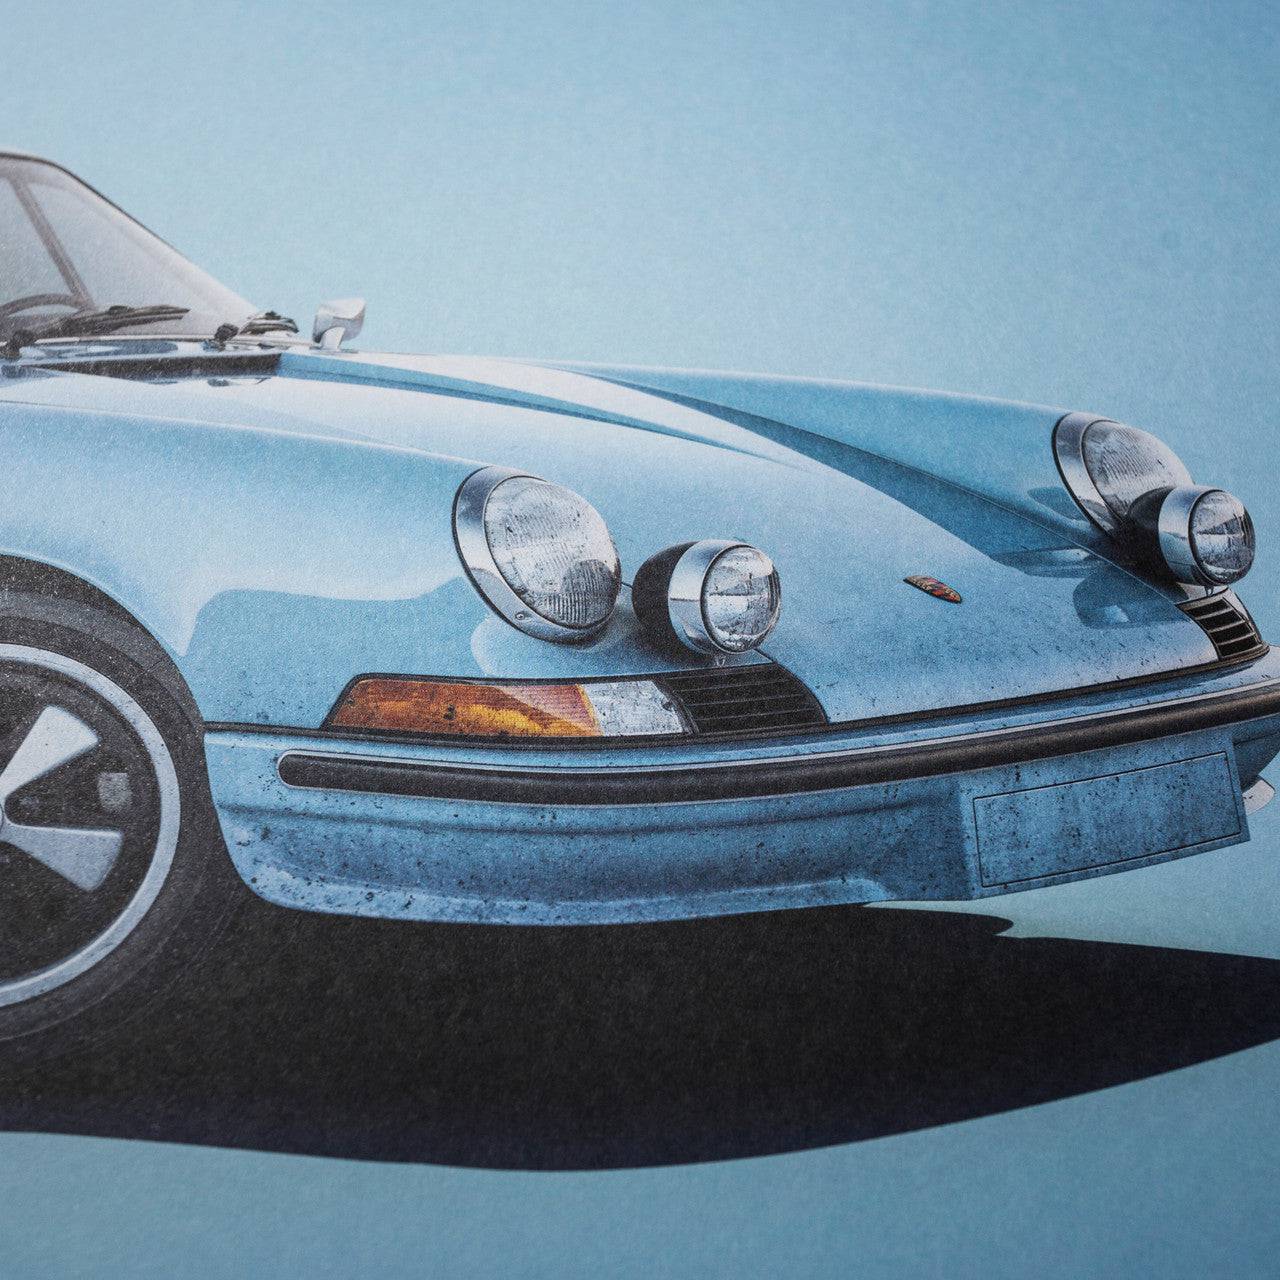 Porsche 911 RS - Blue - Colors of Speed Poster